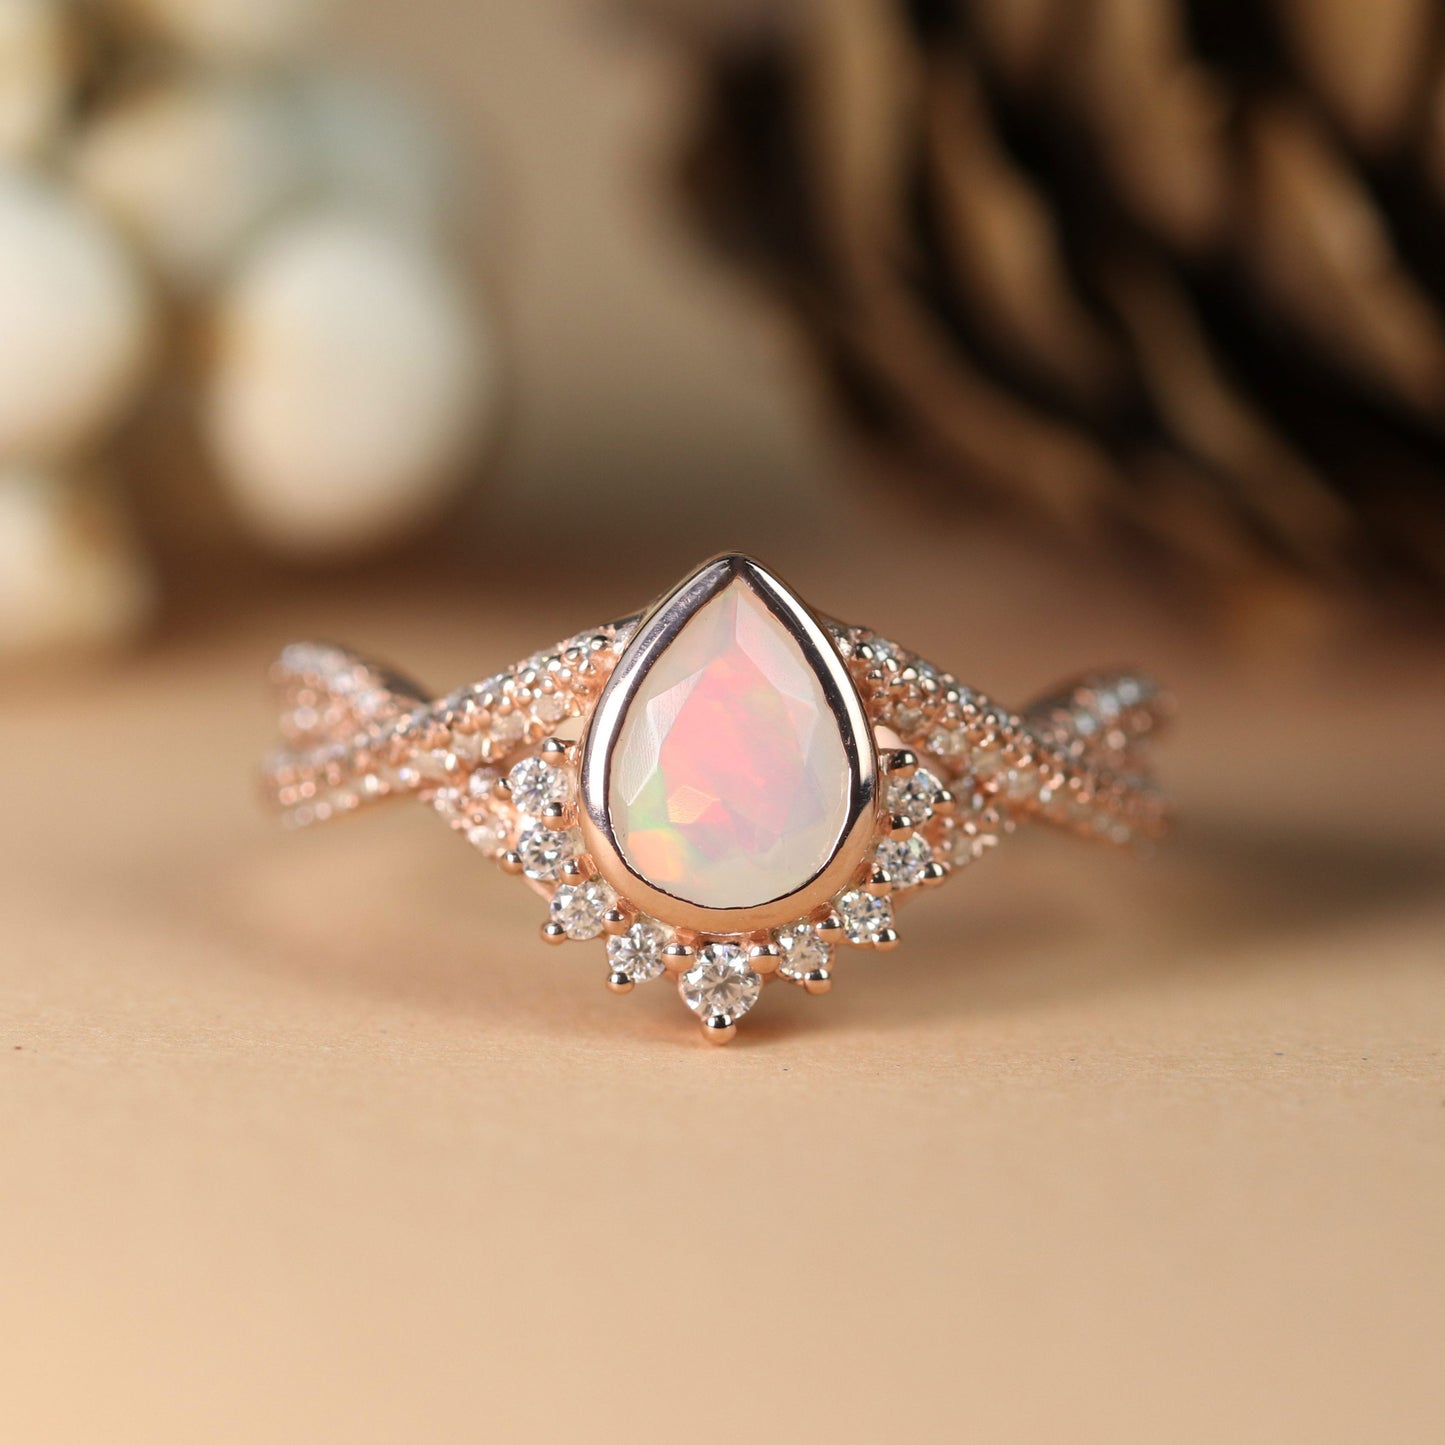 Antique Half Halo 1.5 Carat Pear Shape Opal Engagement Ring in Rose Gold